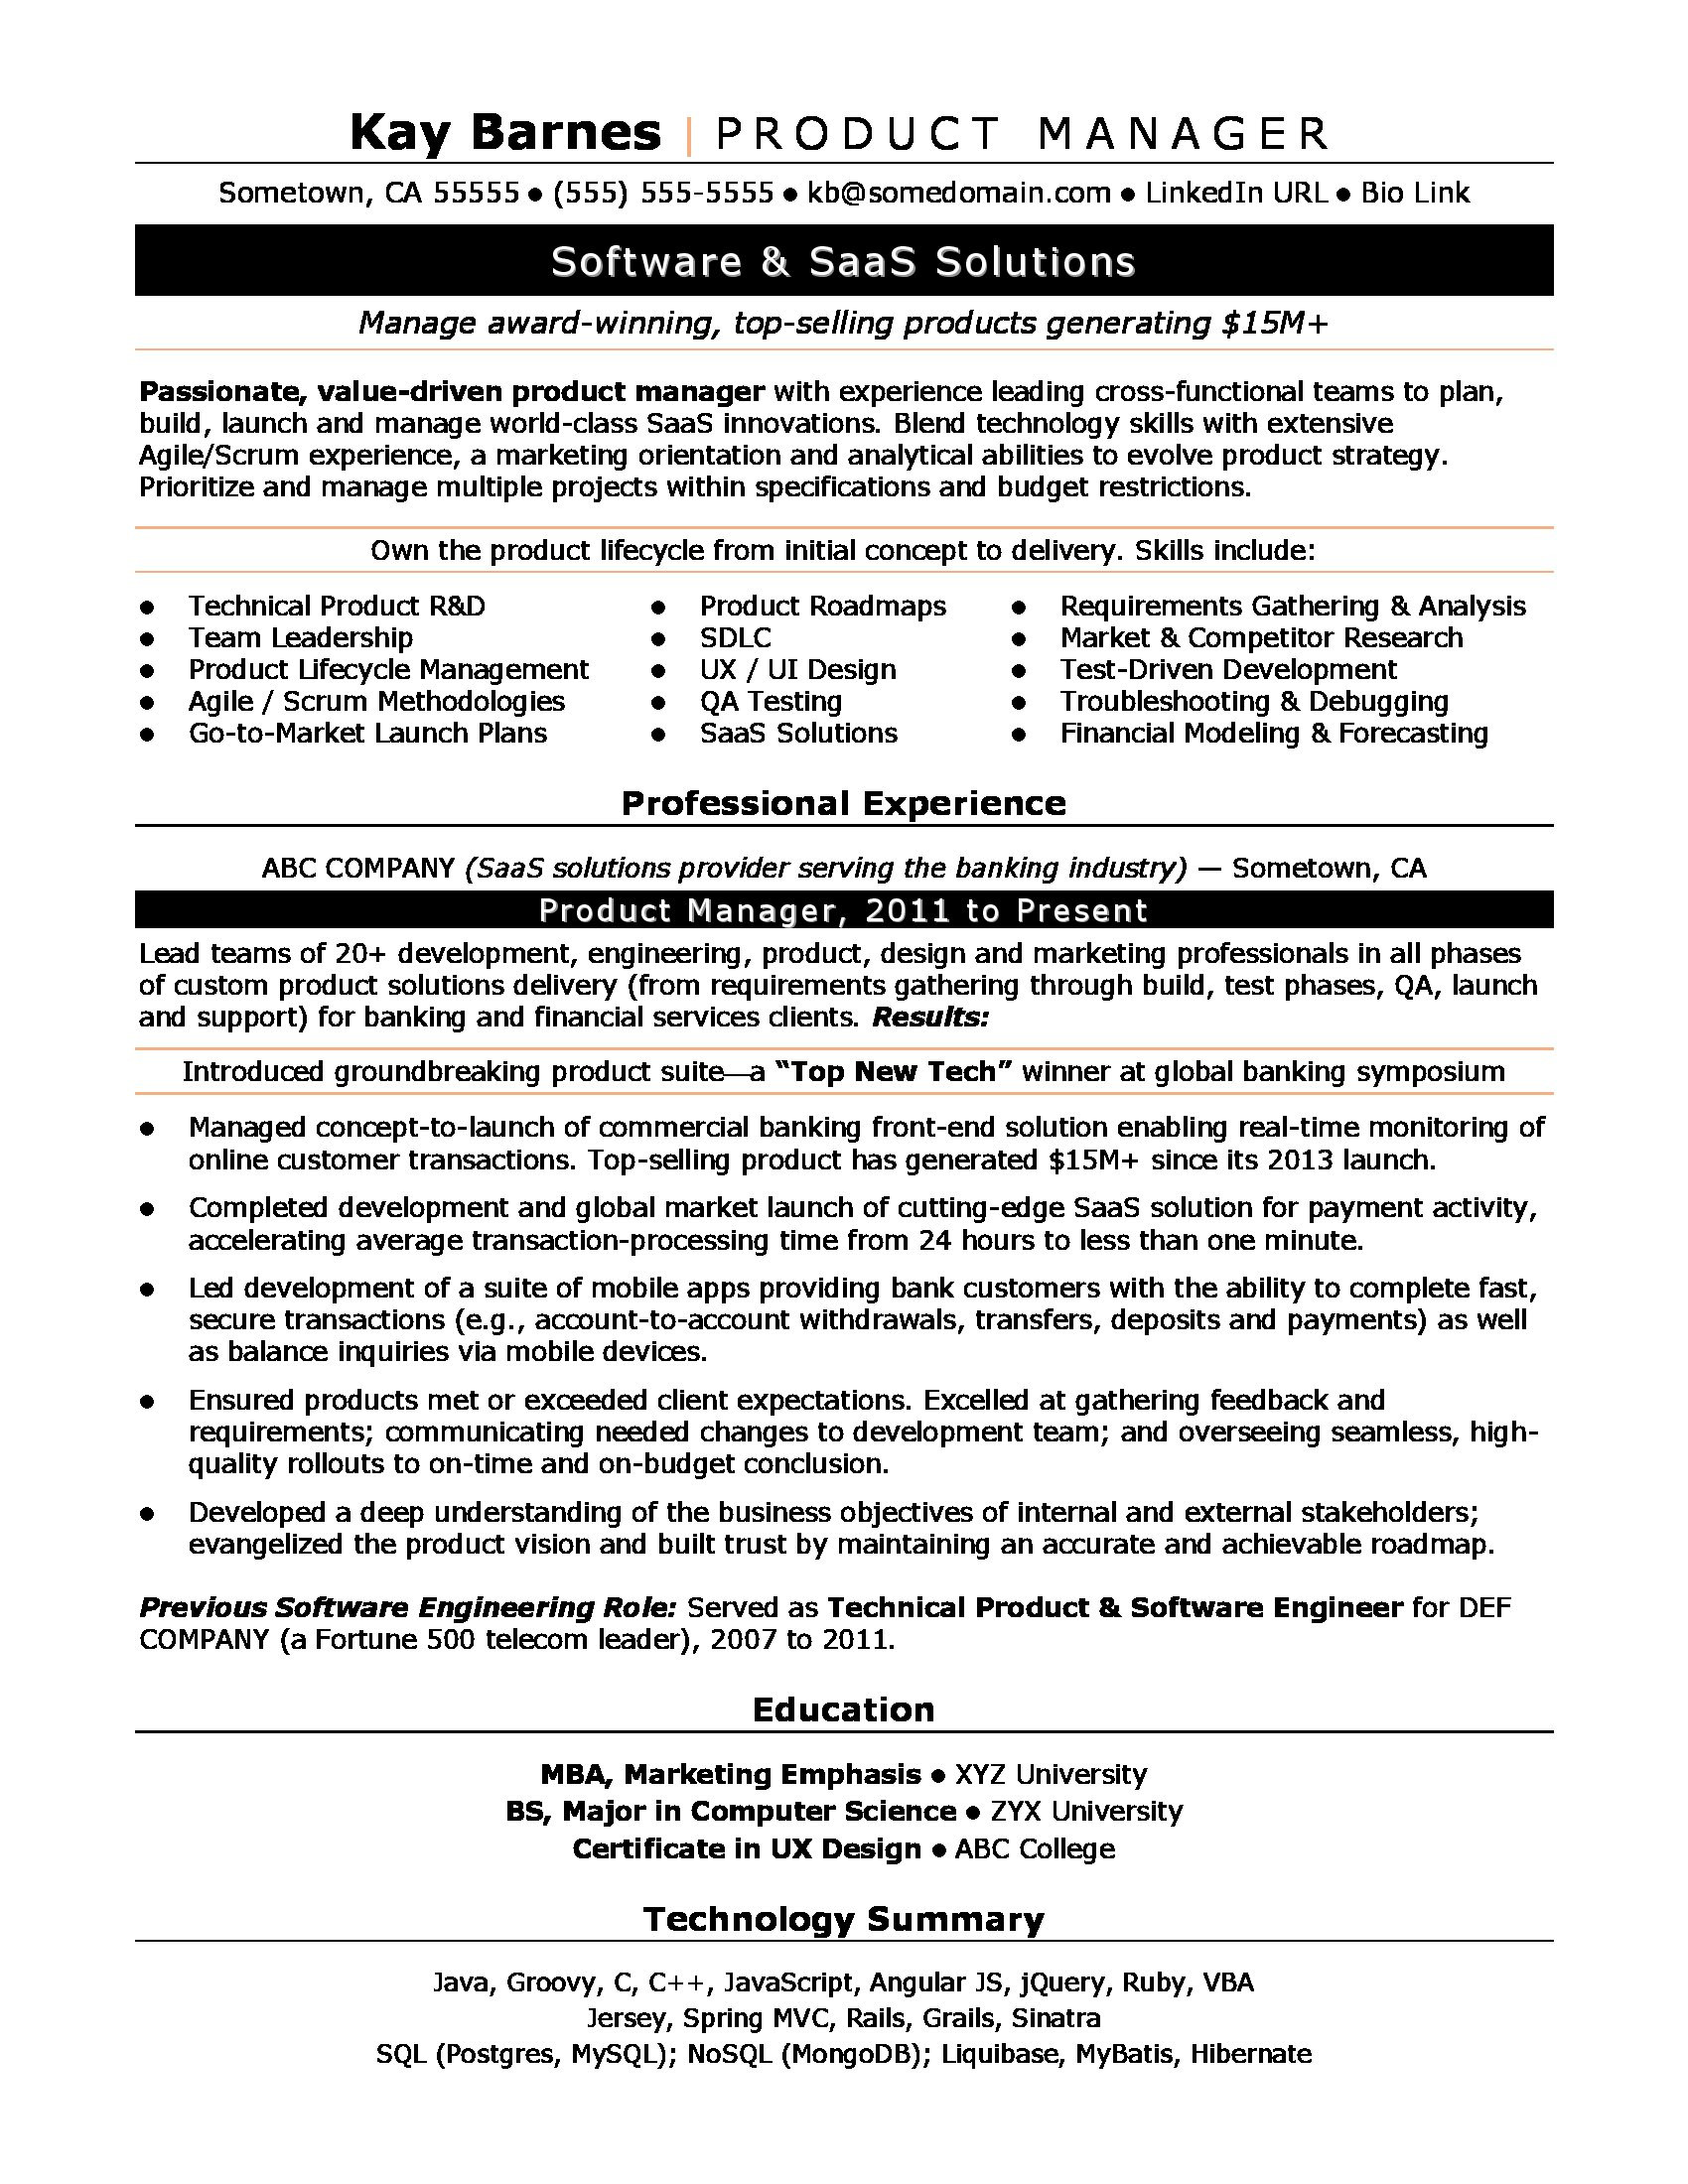 Sample Resume for Product Manager Analytics Product Manager Resume Sample Monster.com